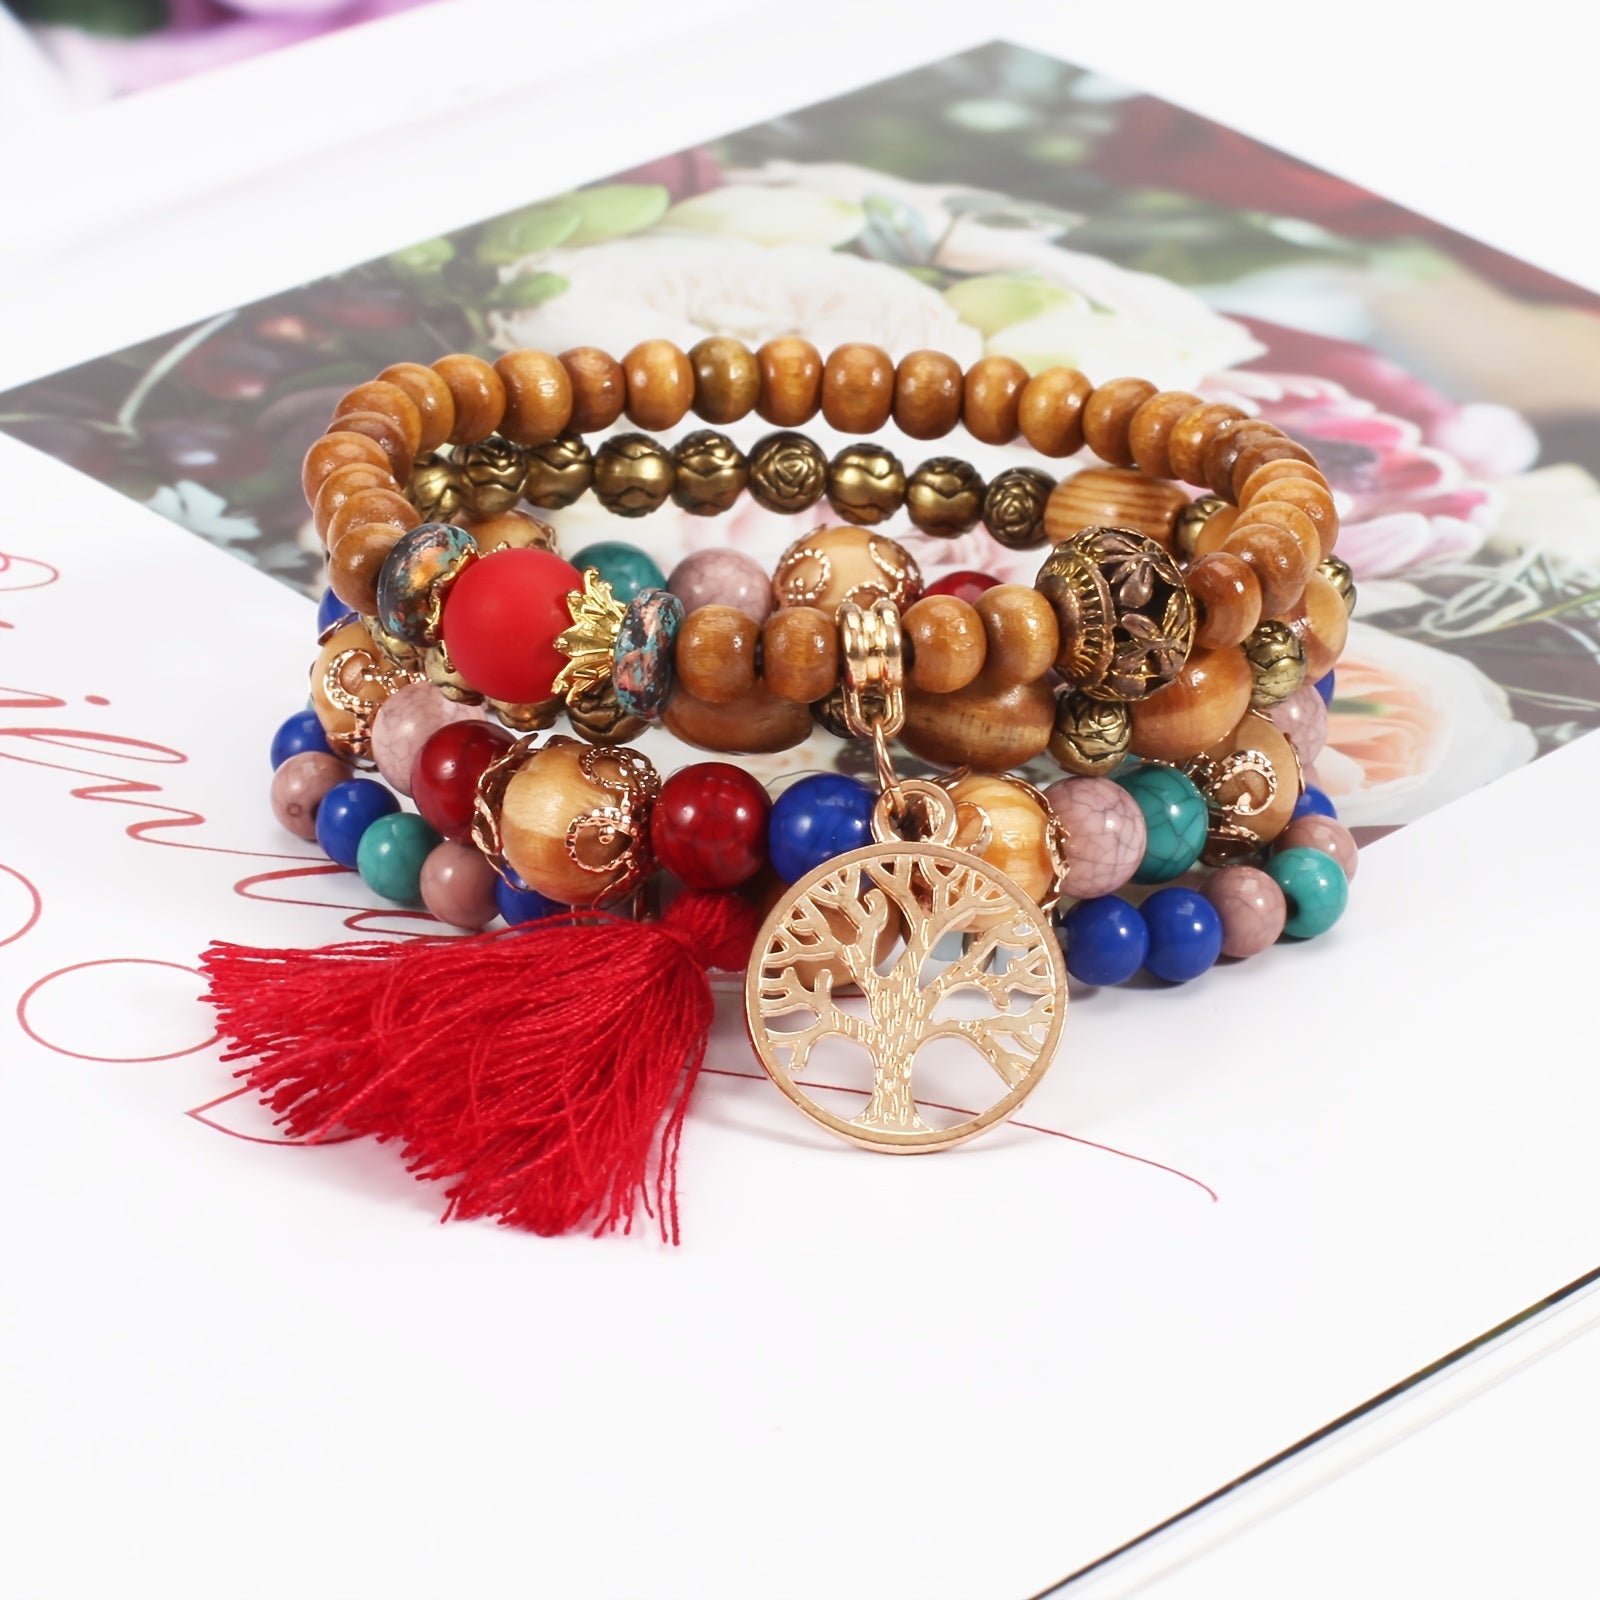 Bohemian Multilayer Beaded Bracelet with Tassel and Tree of Life Pendant - Stackable and Stretchable in Colorful Layers